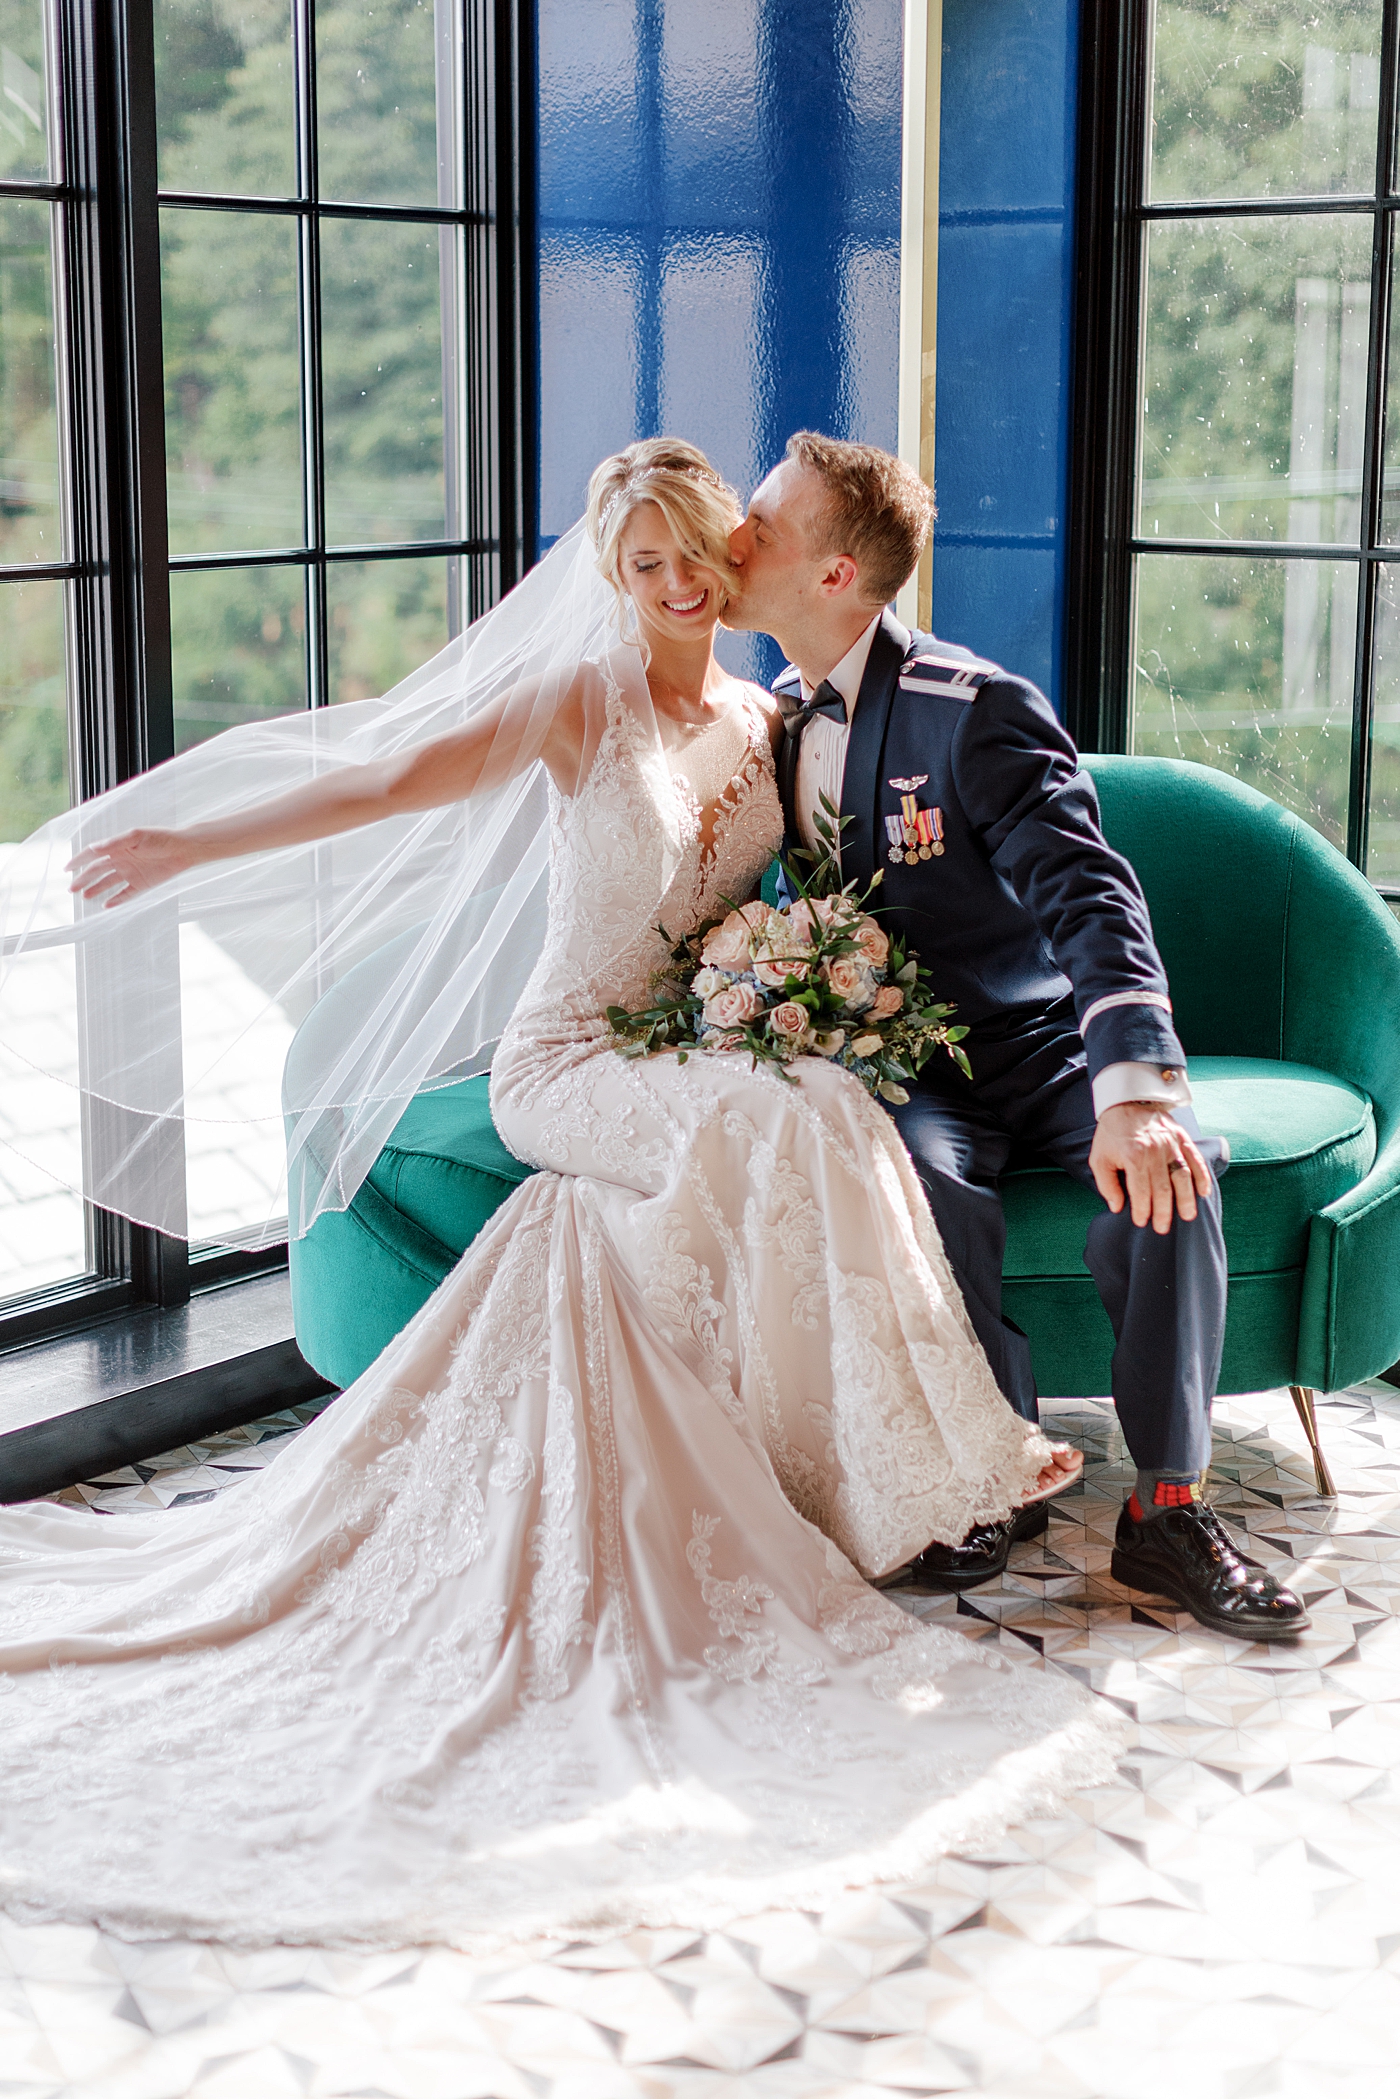 Bride and groom sitting on a green sofa | Image by Hope Helmuth Photography